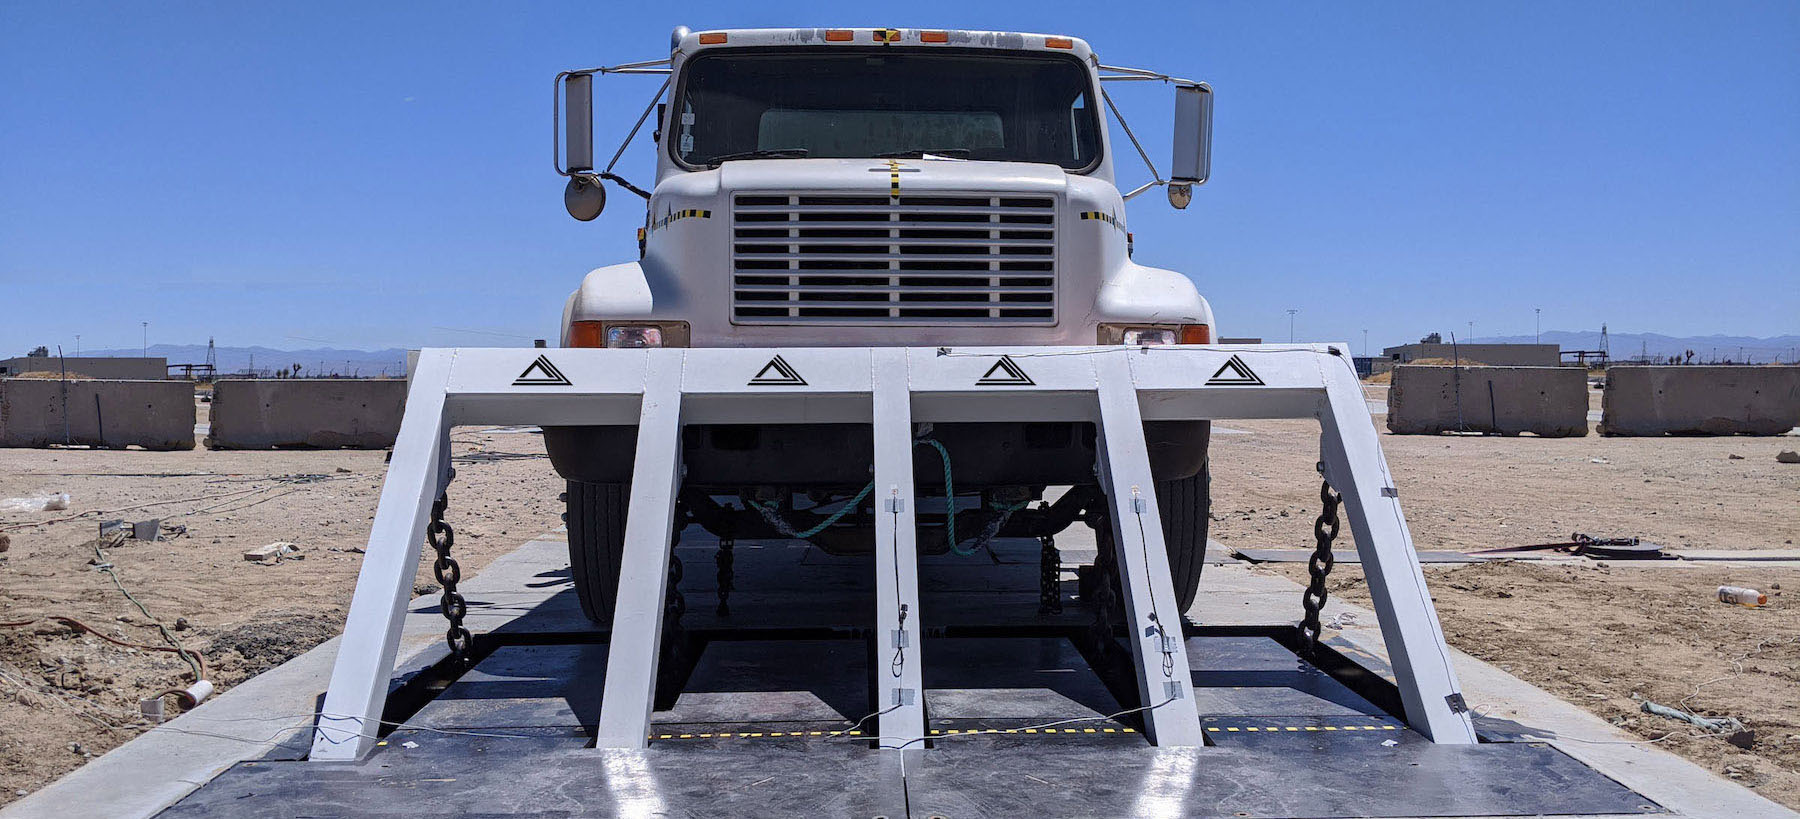 A Delta Scientific crash test in progress, showcasing a heavy-duty vehicle barricade system halting a white truck in a controlled security checkpoint scenario, highlighting the durability and effectiveness of Delta's high-security barriers.